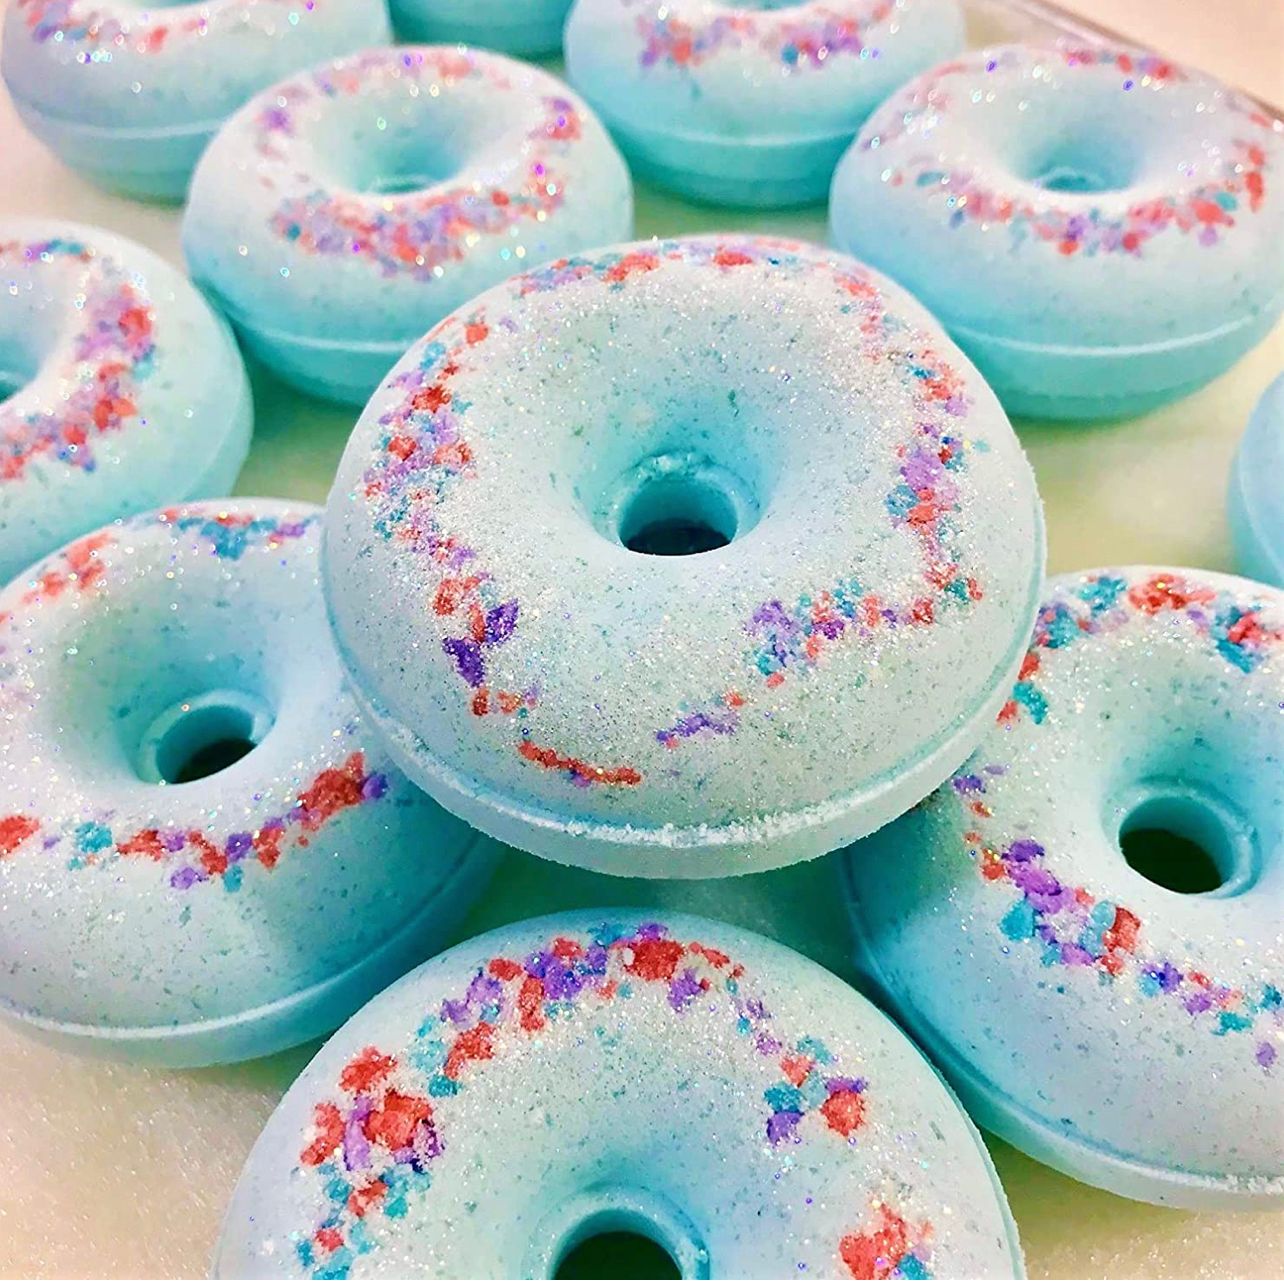 Our Cotton Candy bath bombs,  light blue with pastel confetti and glitter on the top. Several laid out in the picture and stacked neatly.